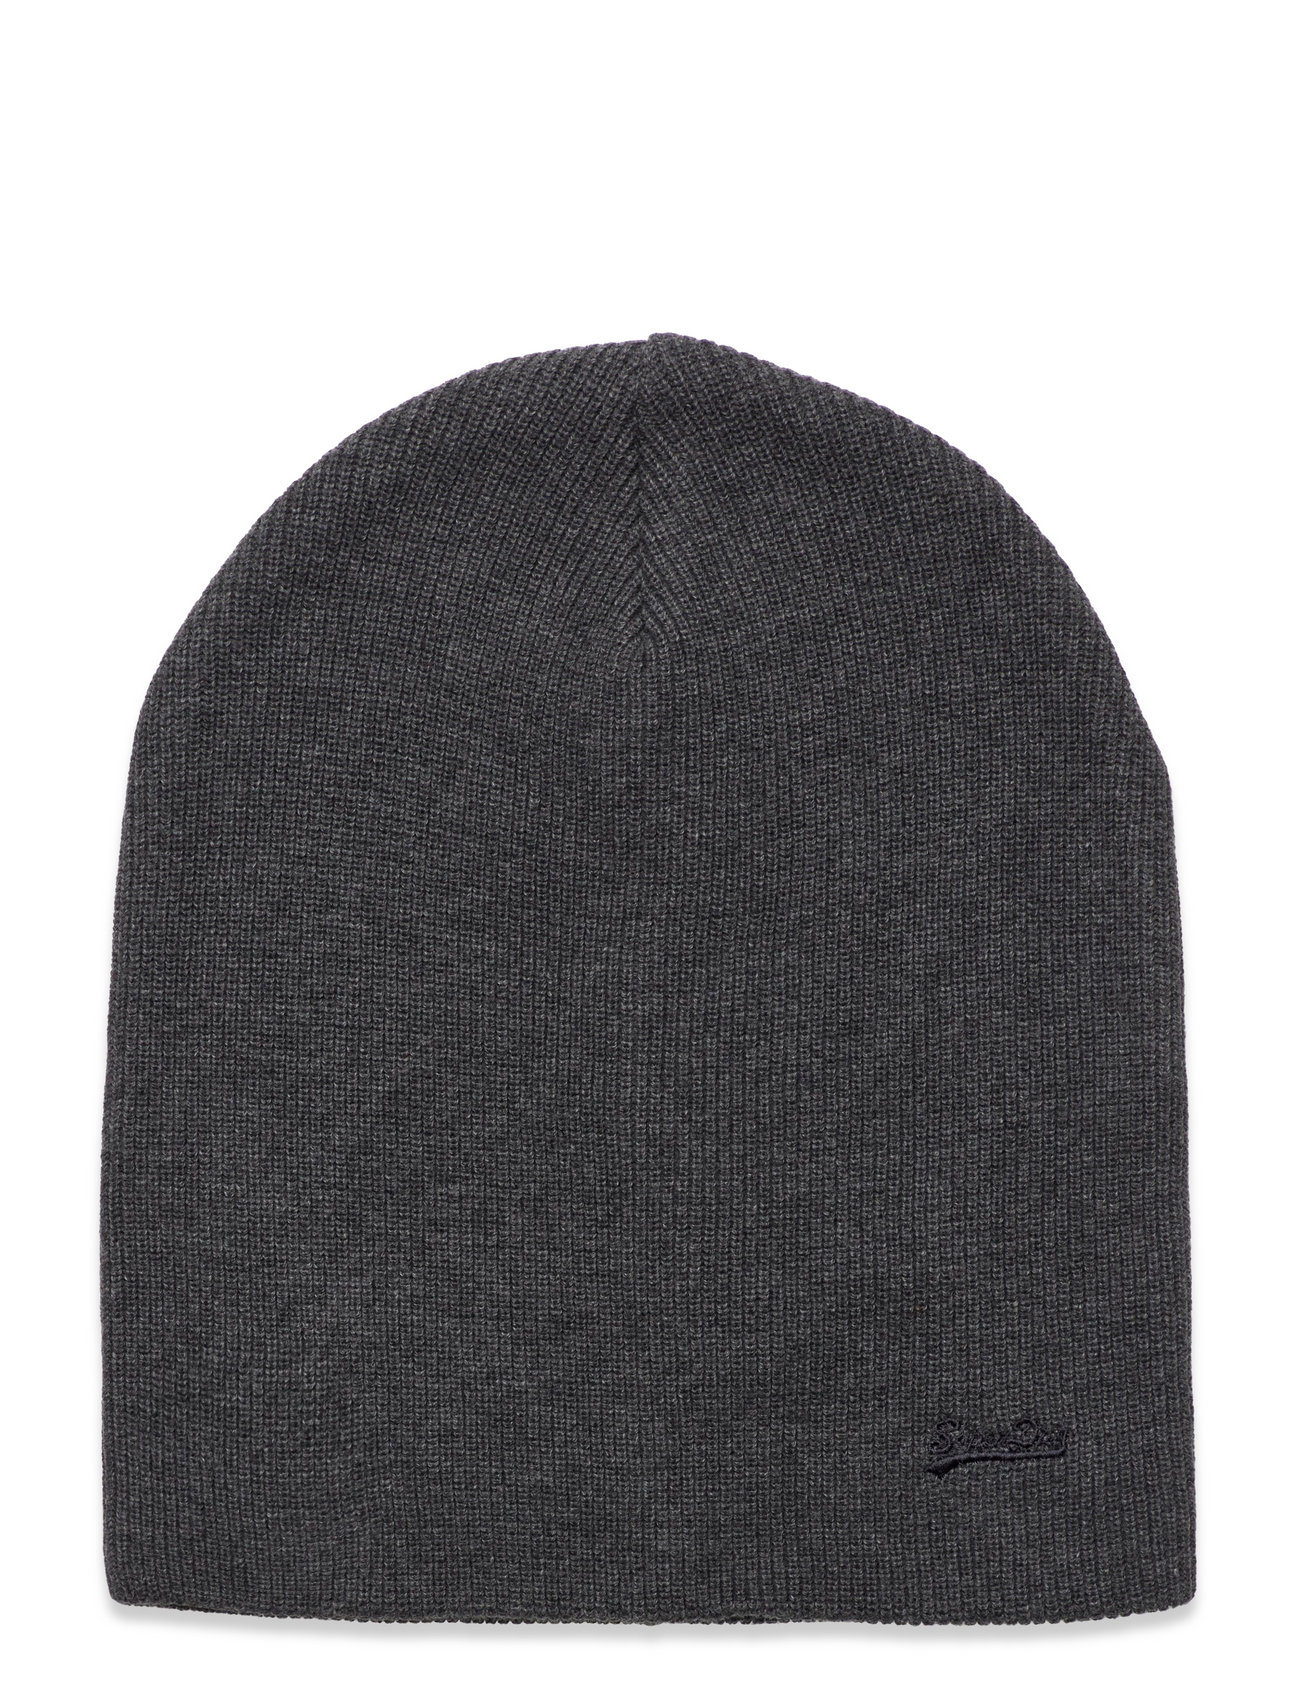 Superdry Knitted Logo Beanie Hat - Hats